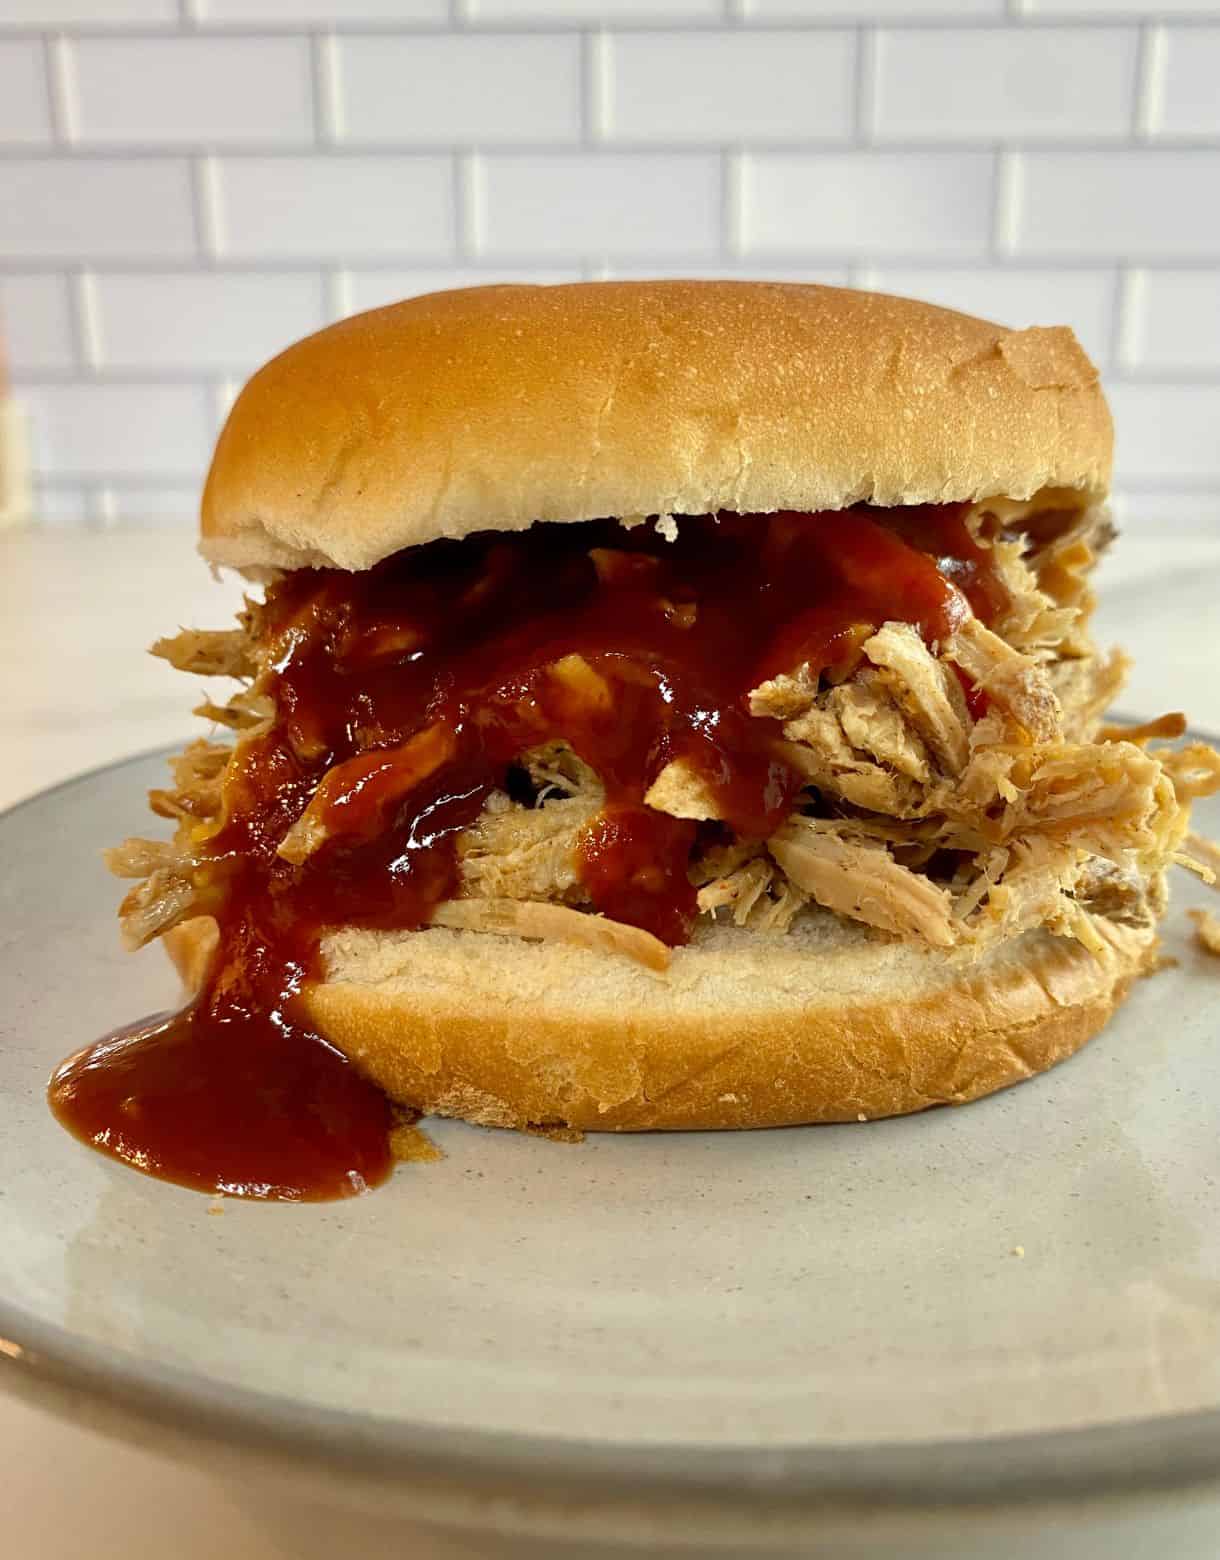 Coca-Cola Pulled Pork on a bun with BBQ sauce.